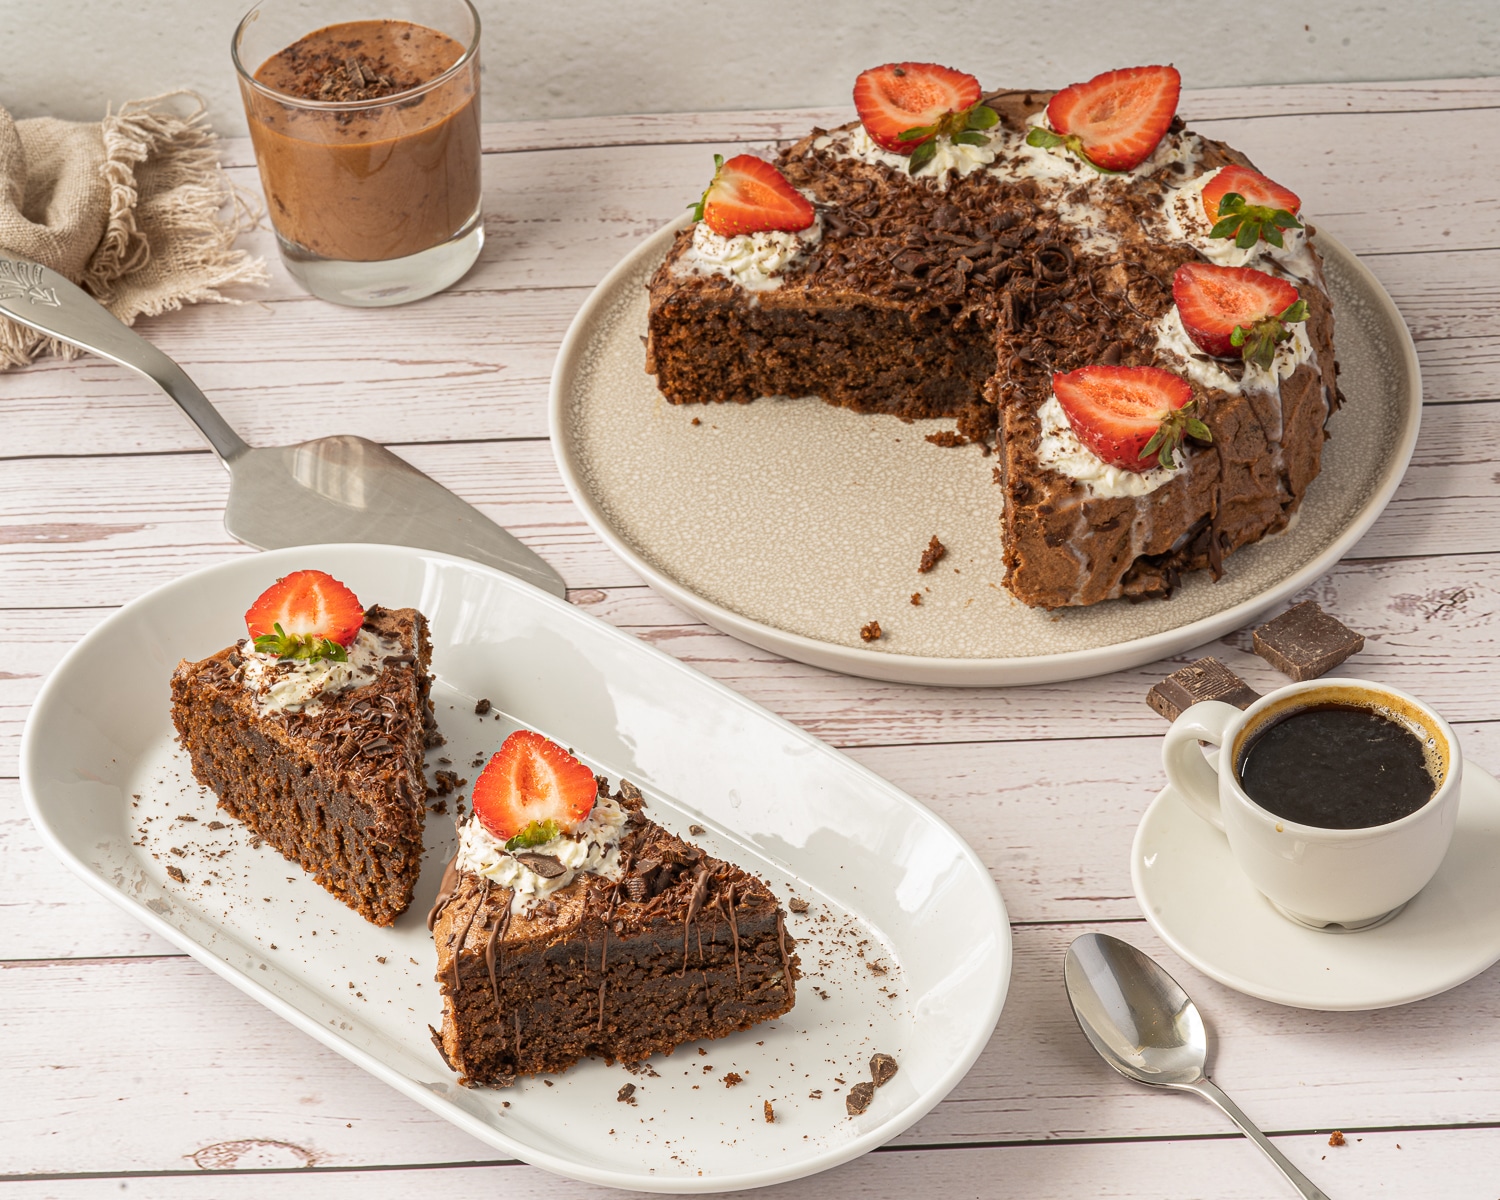 Horizontal picture of finished chocolate mousse cake with sliced strawberries on top and two pieces of cake on a white plate to the bottom left and a white mug of coffee to the right.